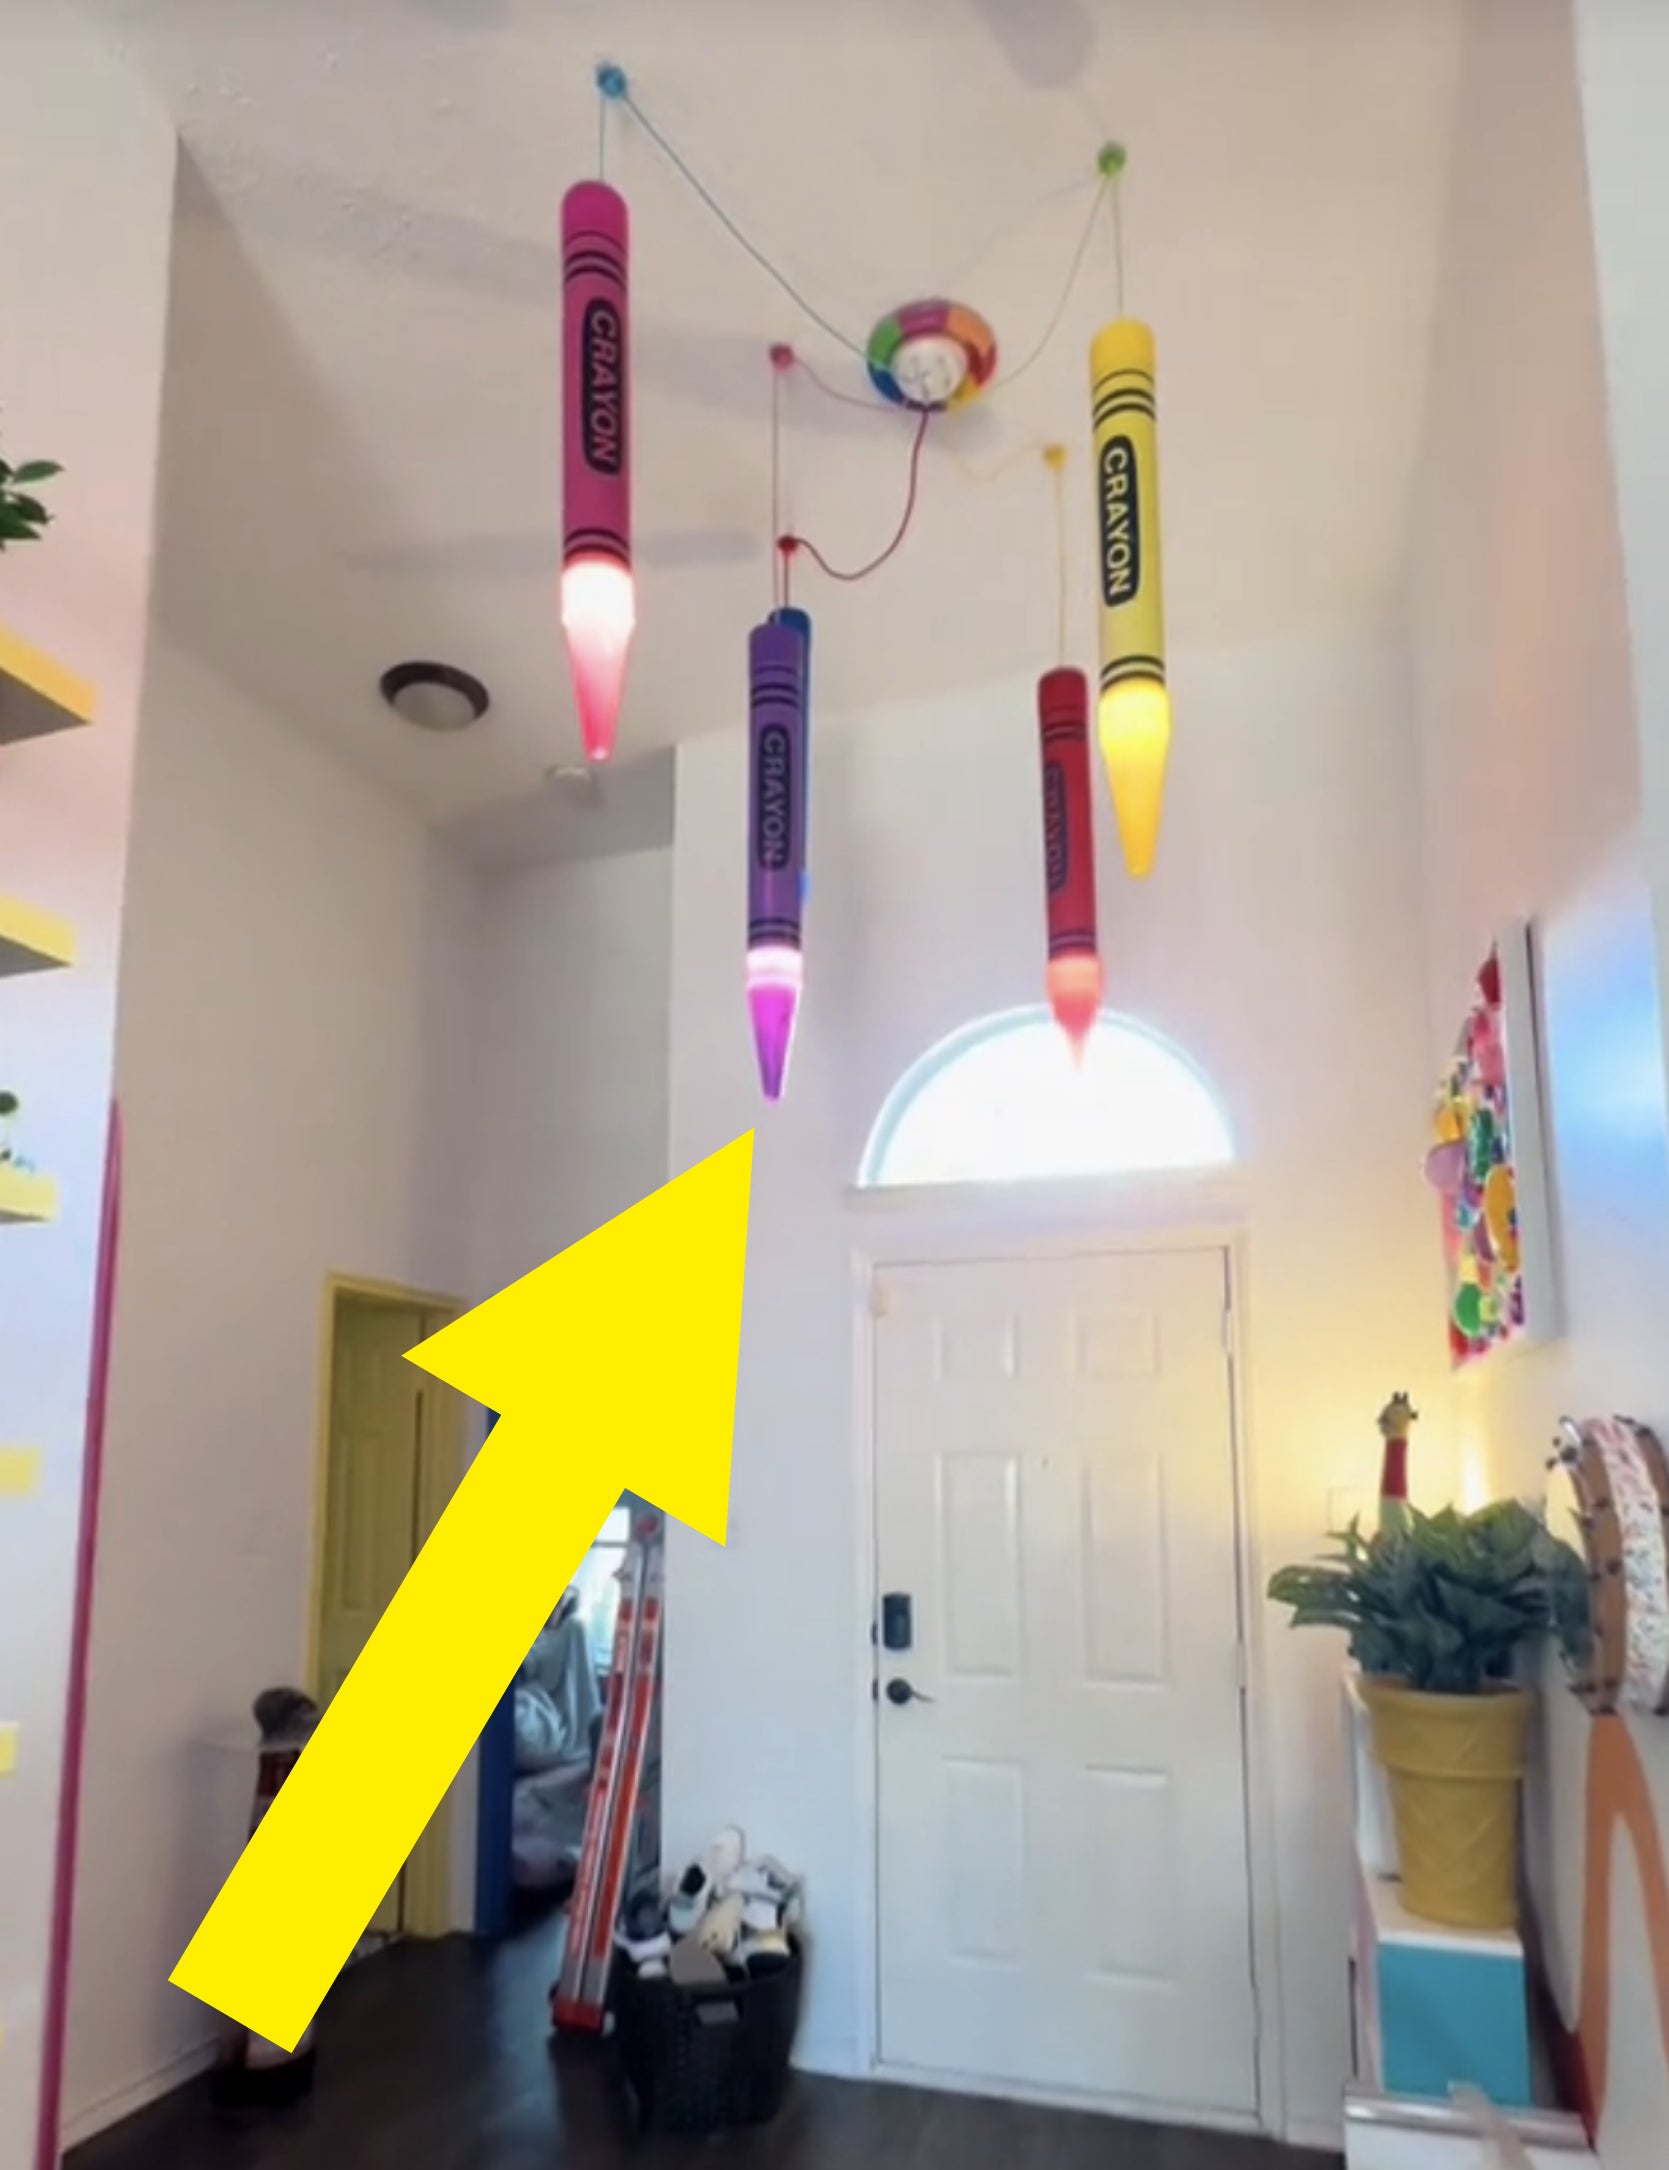 Room with crayon-shaped lights, assorted decor, and a skateboard near the entrance